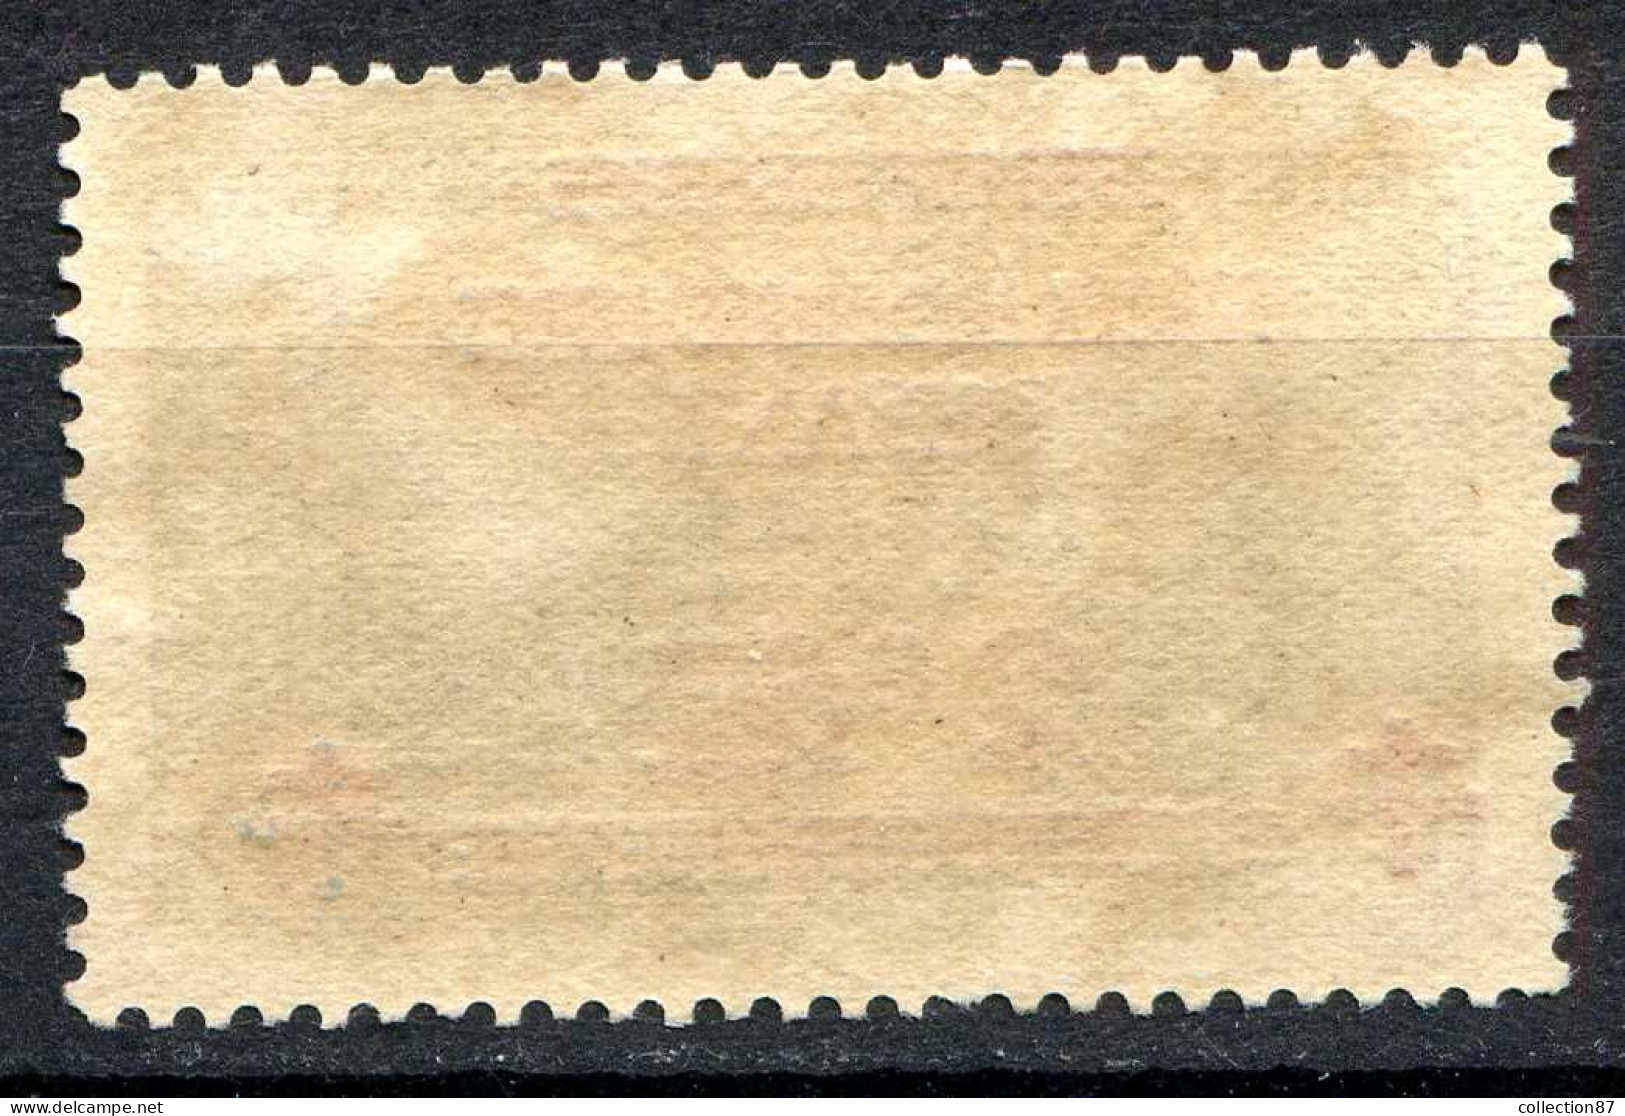 REF 087 > LEVANT < N° 43 * * < Neuf Luxe Gomme Coloniale - MNH * * - Unused Stamps